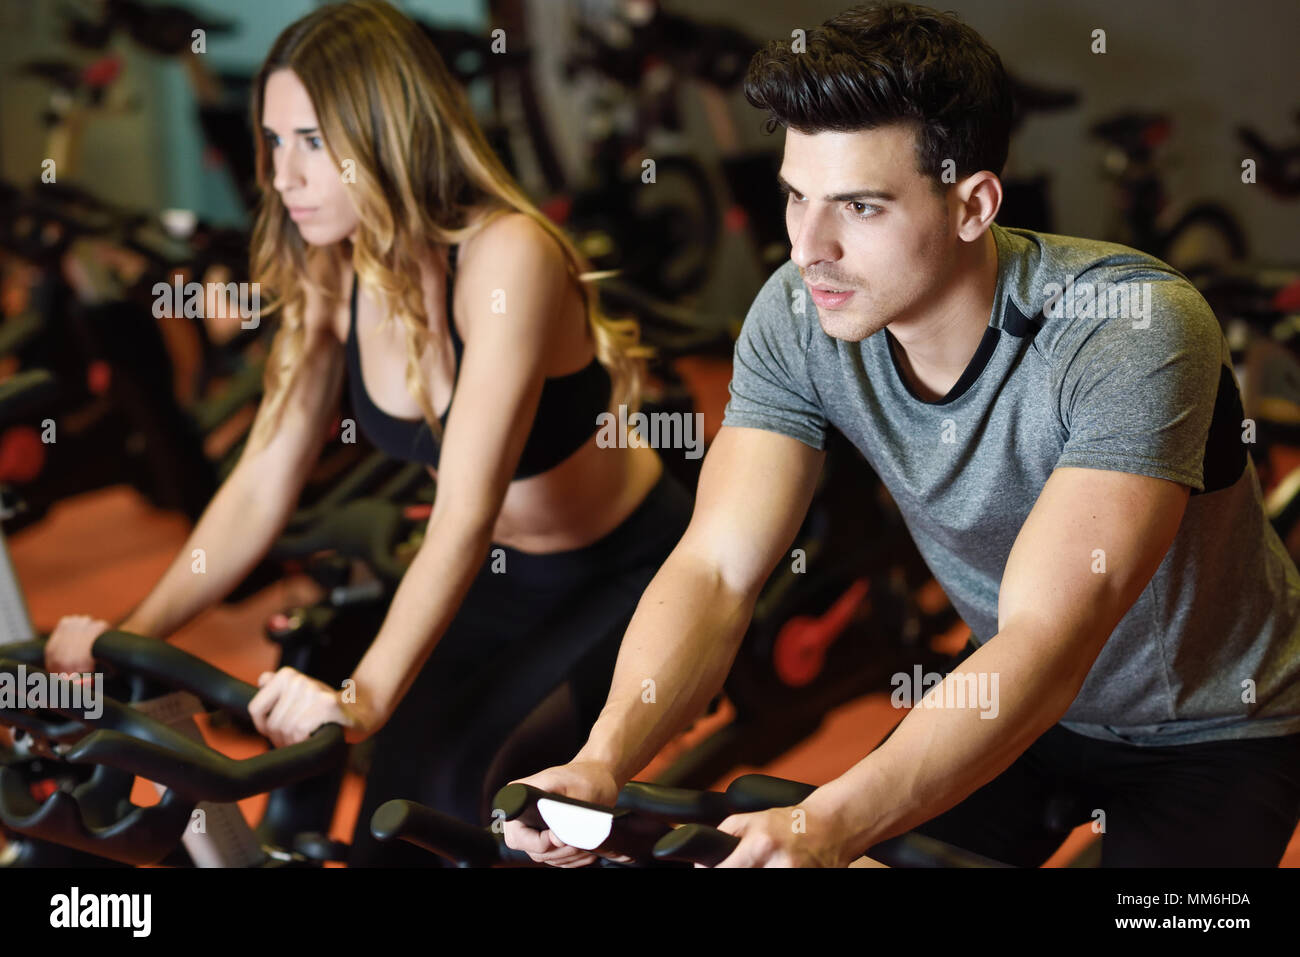 Young man and woman biking in the gym, exercising legs doing cardio workout cycling bikes. Two people in a spinning class wearing sportswear. Stock Photo